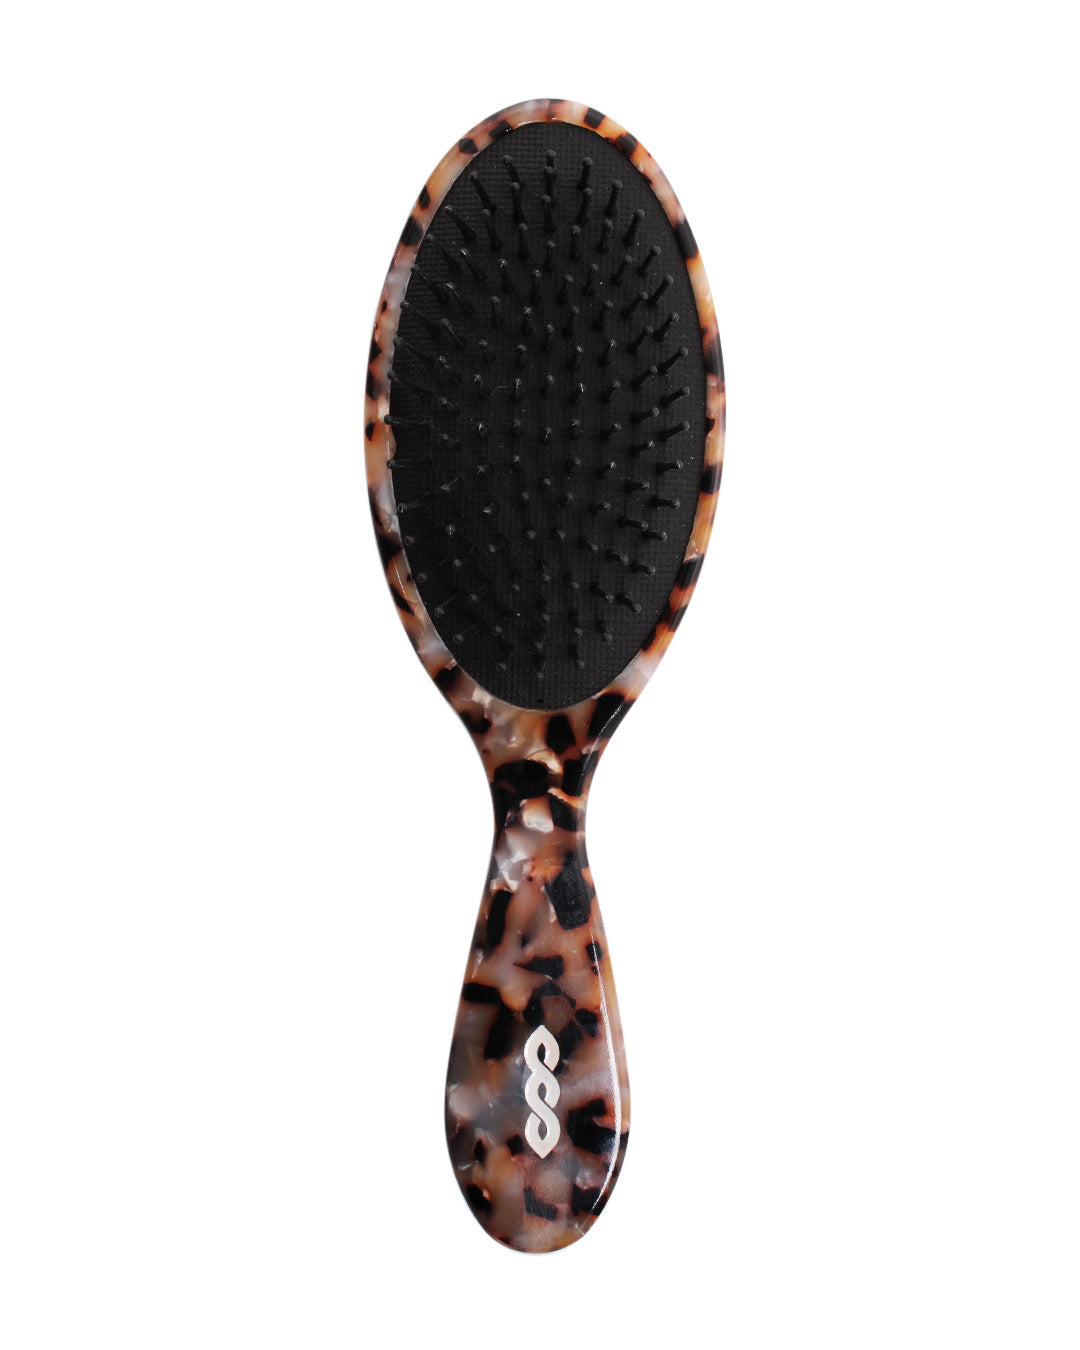 BANDED Women's Hair Accessories River Rock - Hair Brush